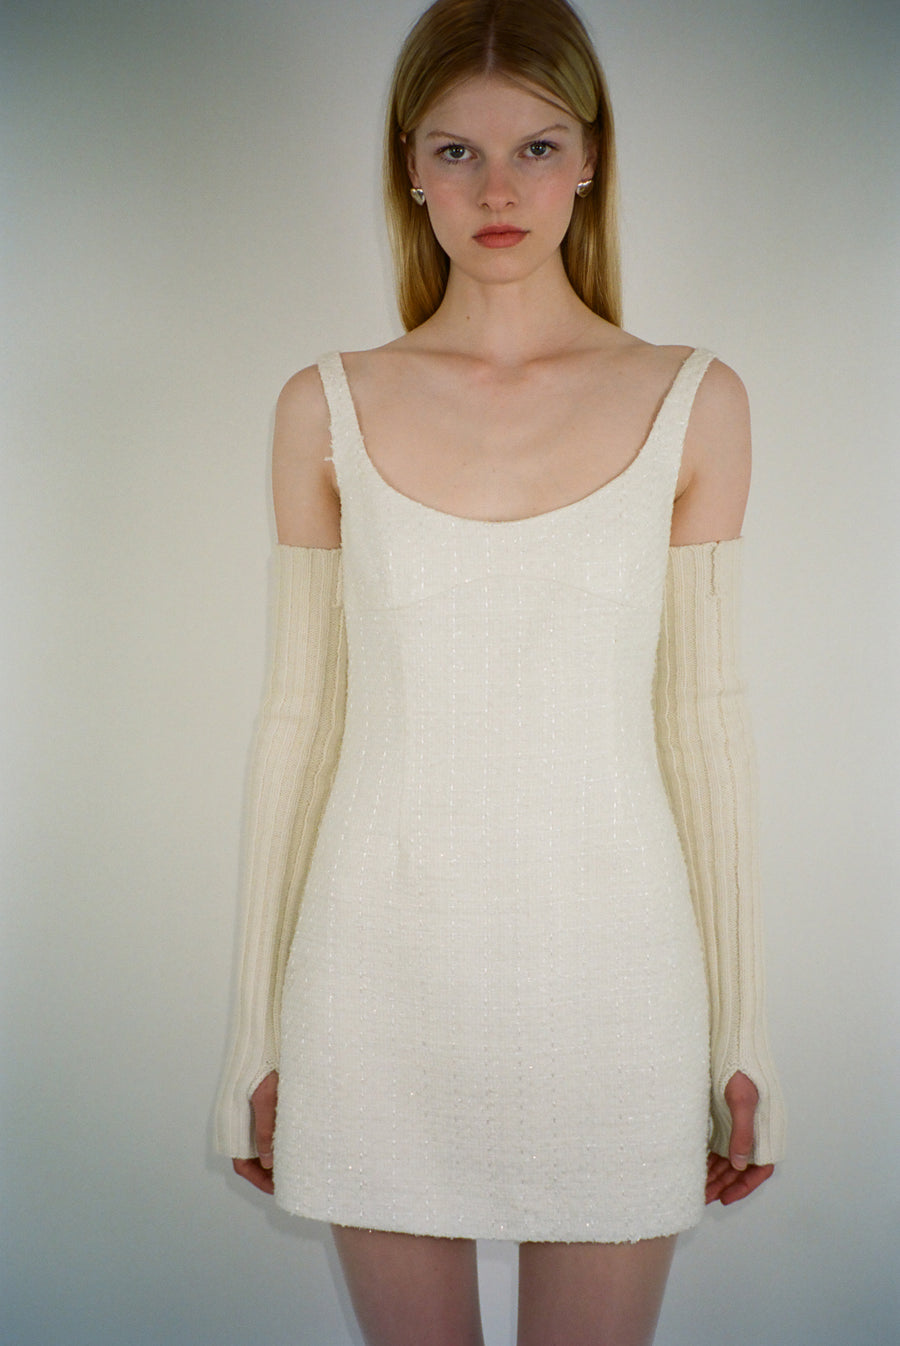 Knit arm warmers in cream with thumbhole on model